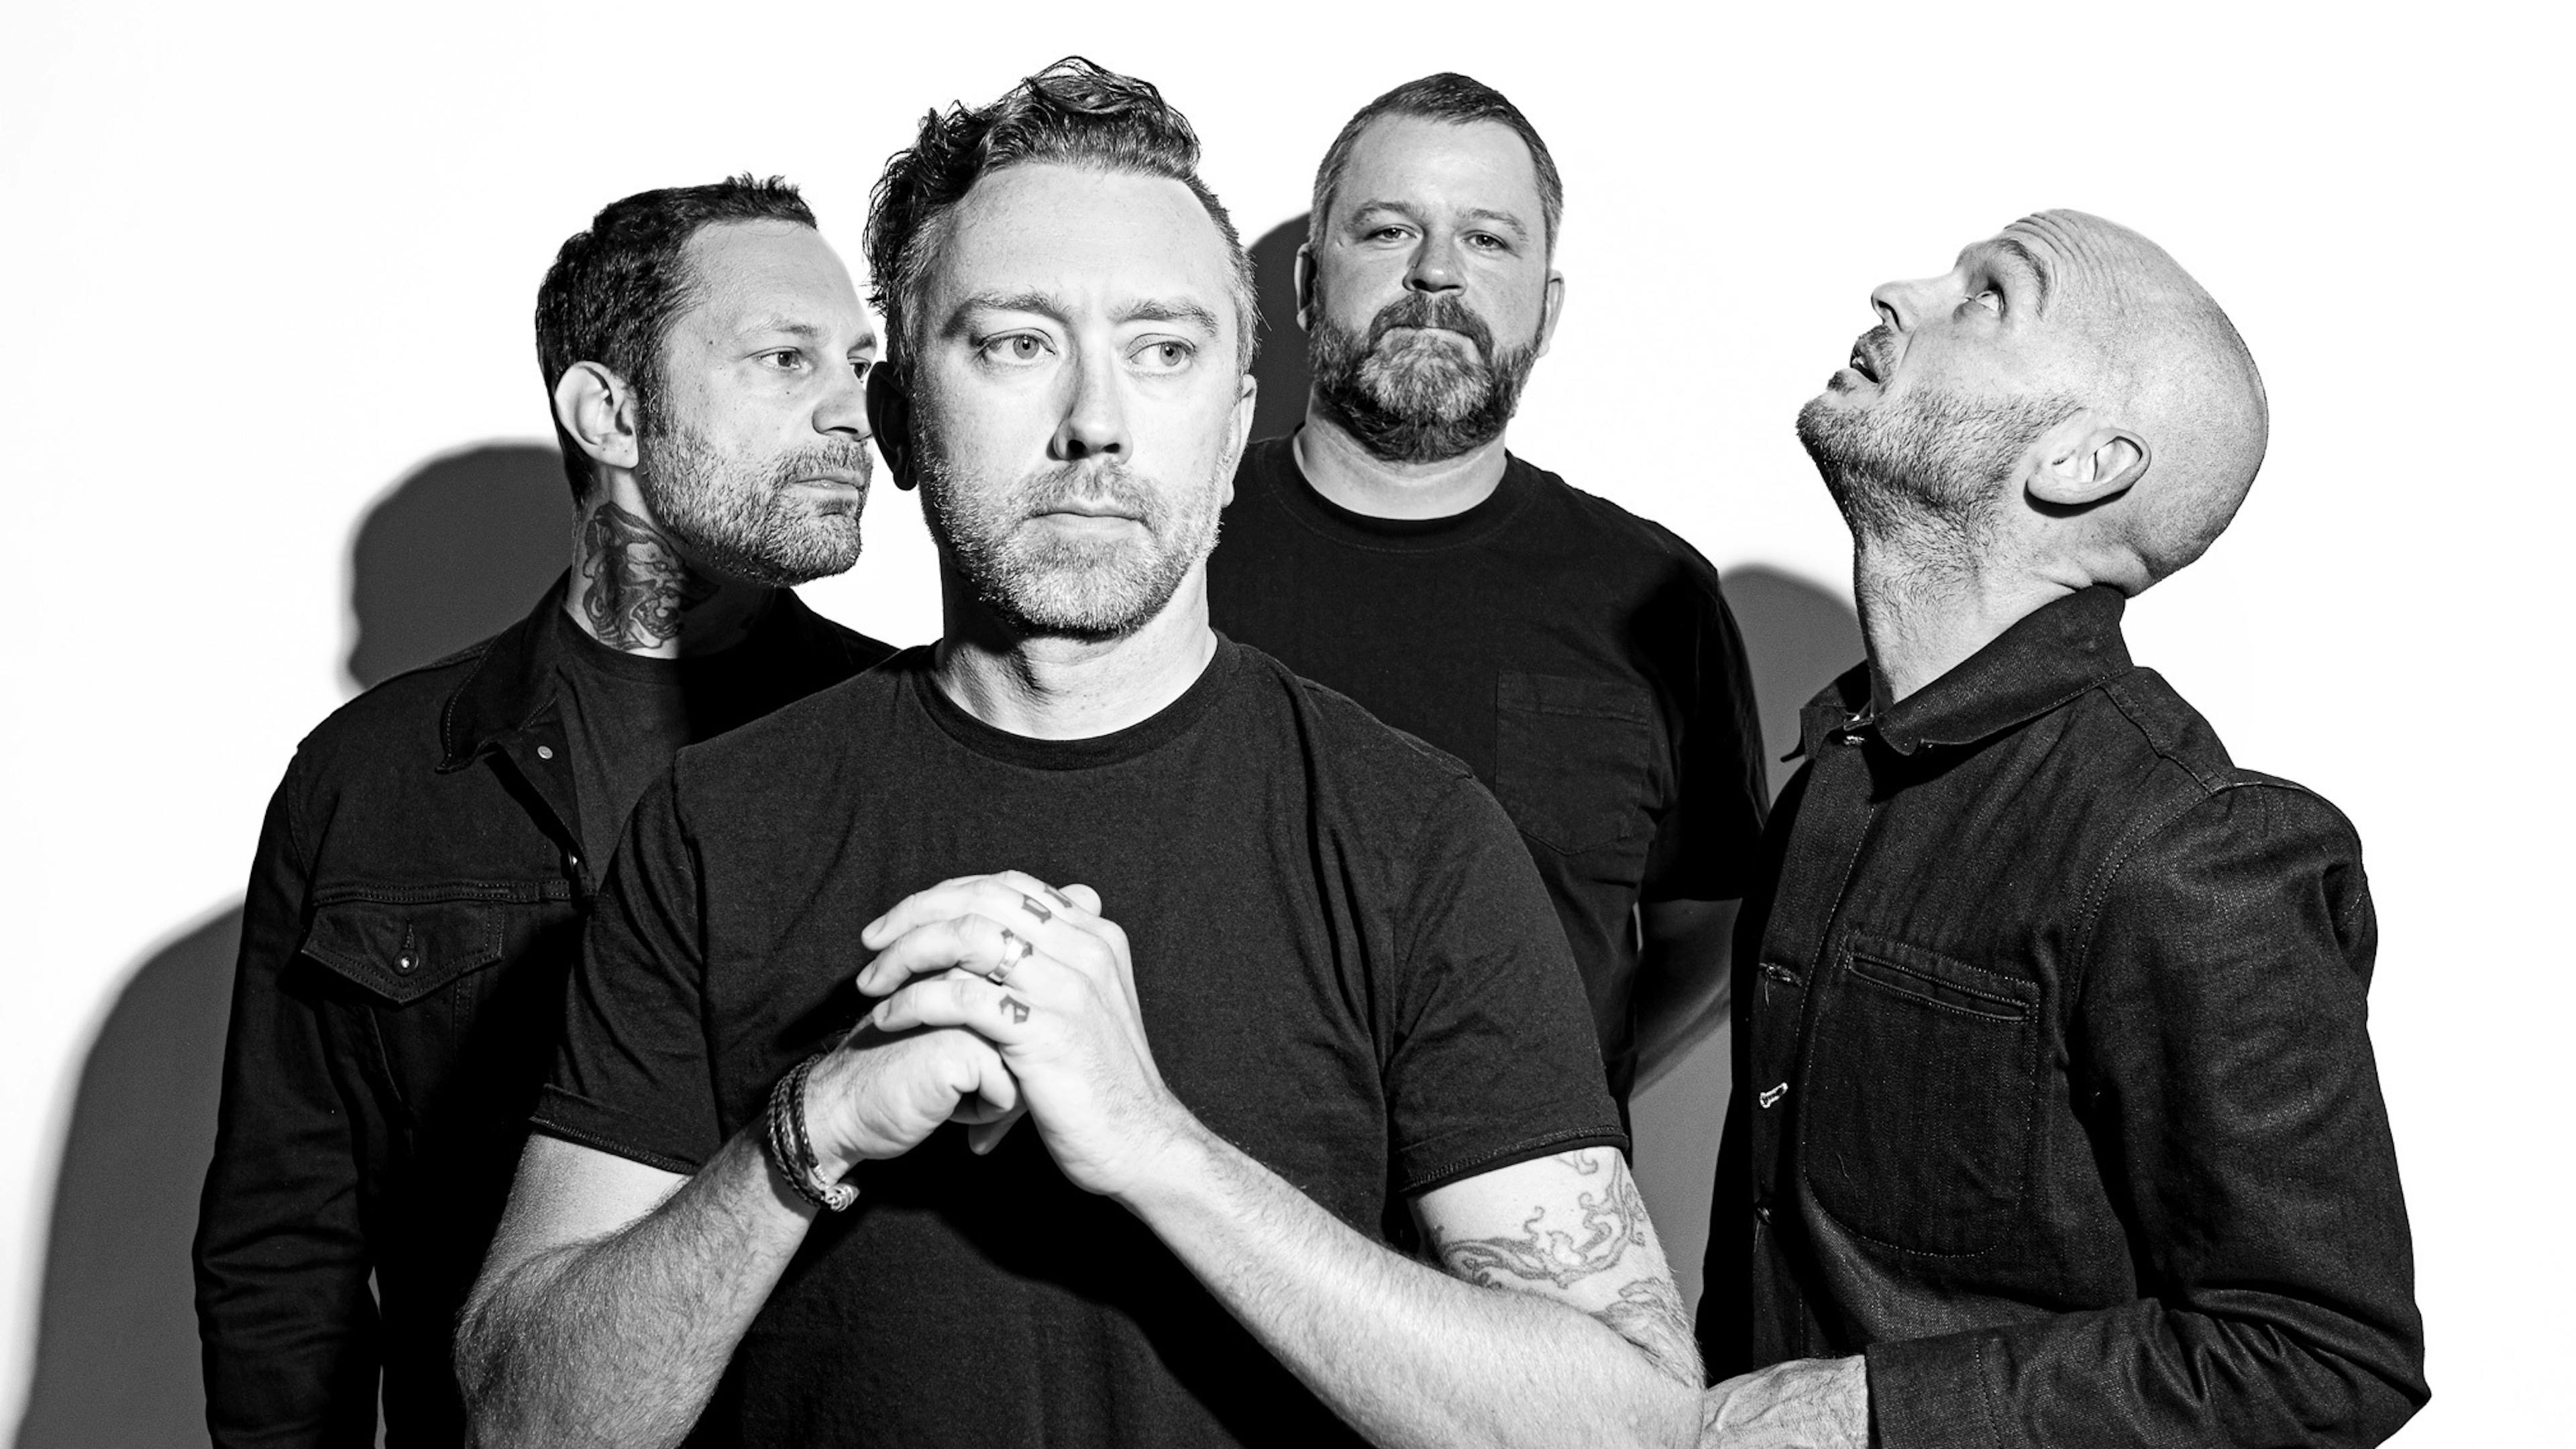 Rise Against have announced several UK and European headline shows